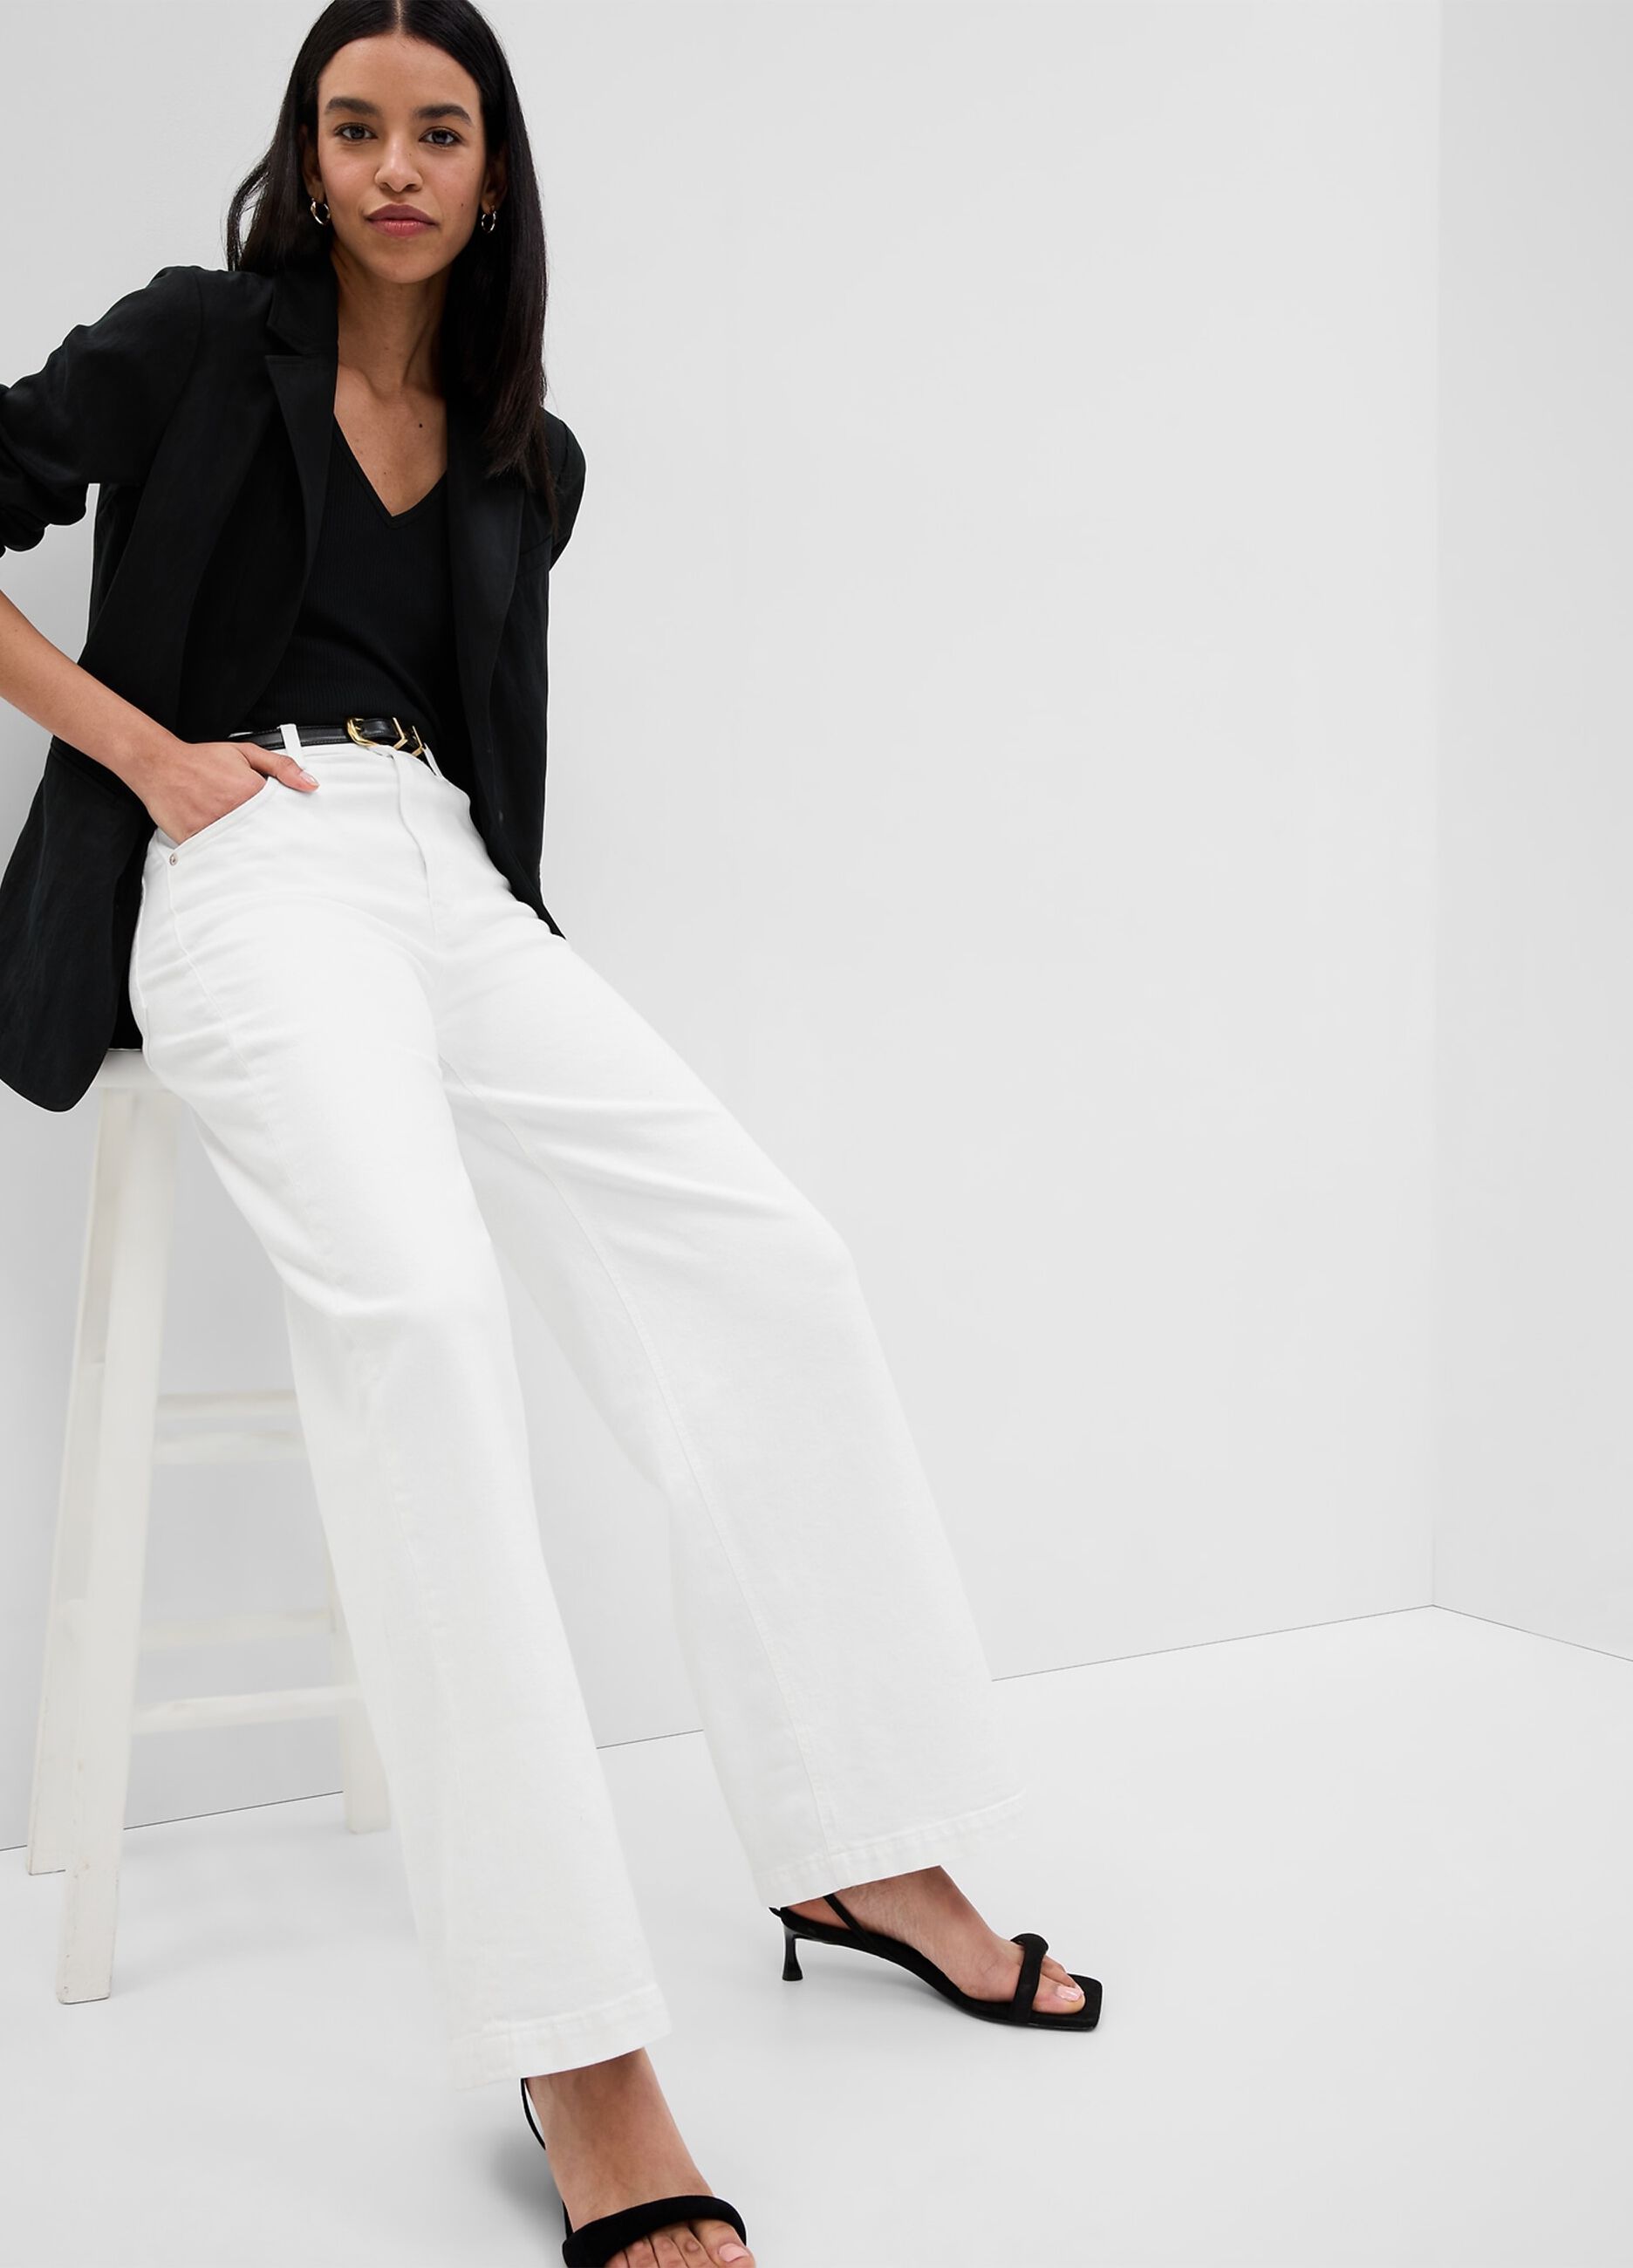 Straight-fit, ankle-length, high-rise jeans